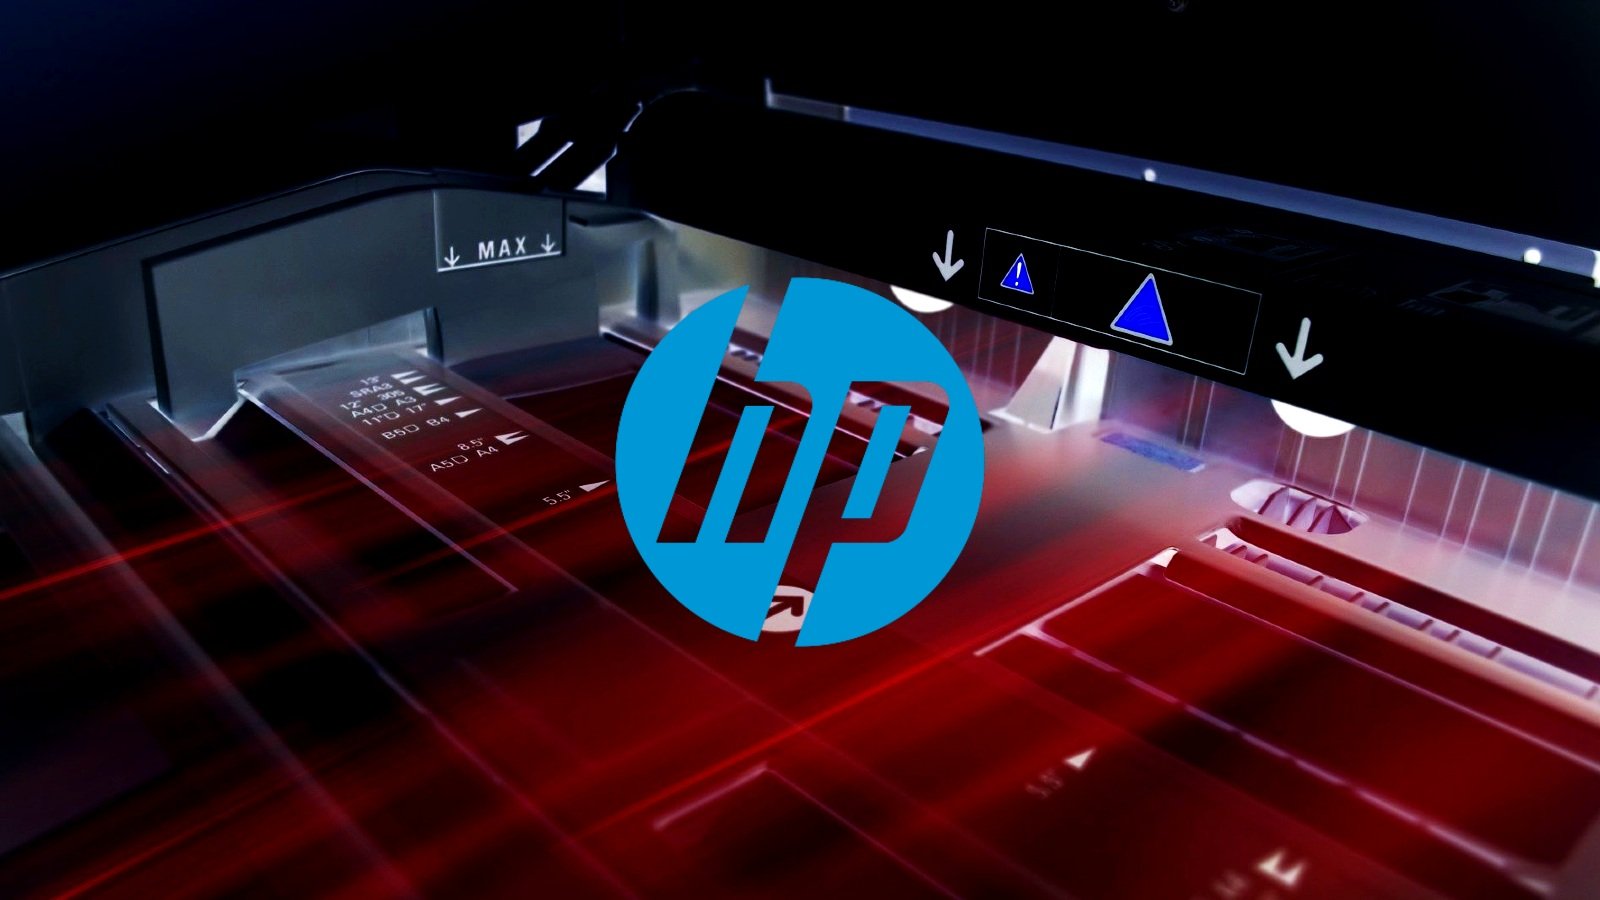 HP to patch critical bug in LaserJet printers within 90 days